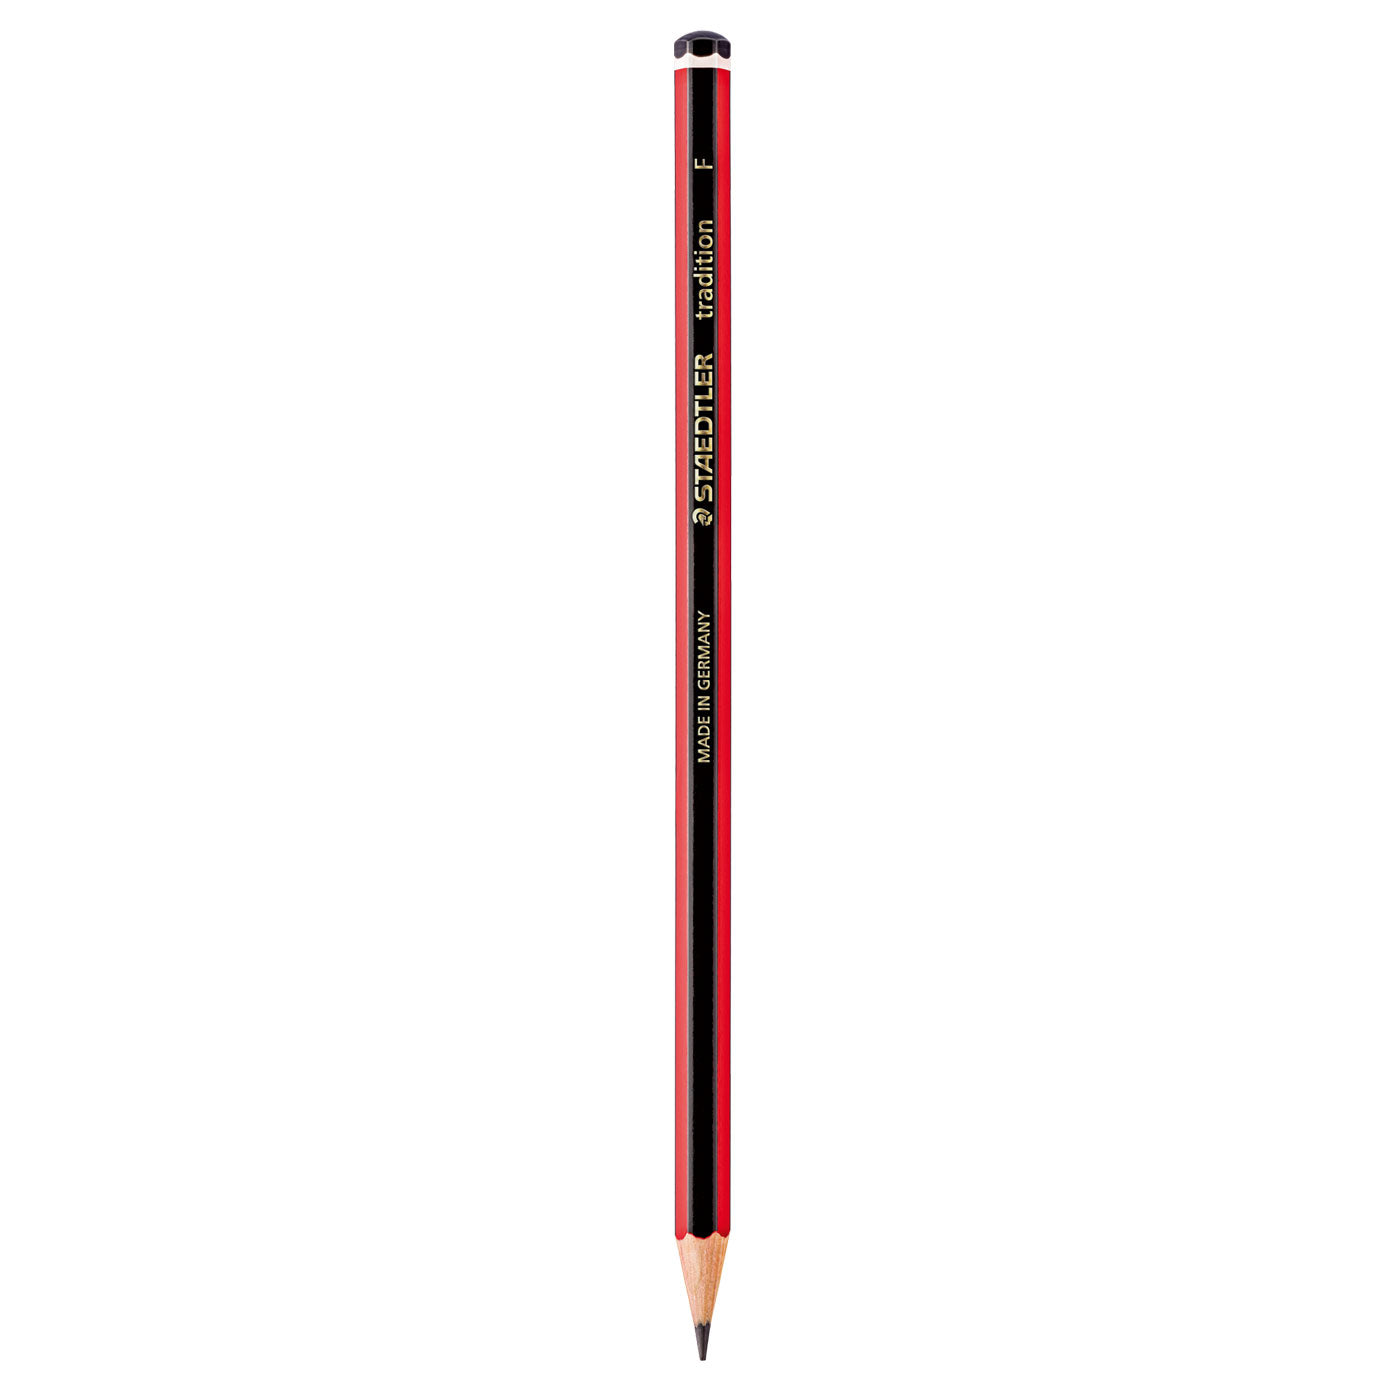 Staedtler Tradition Pencil F